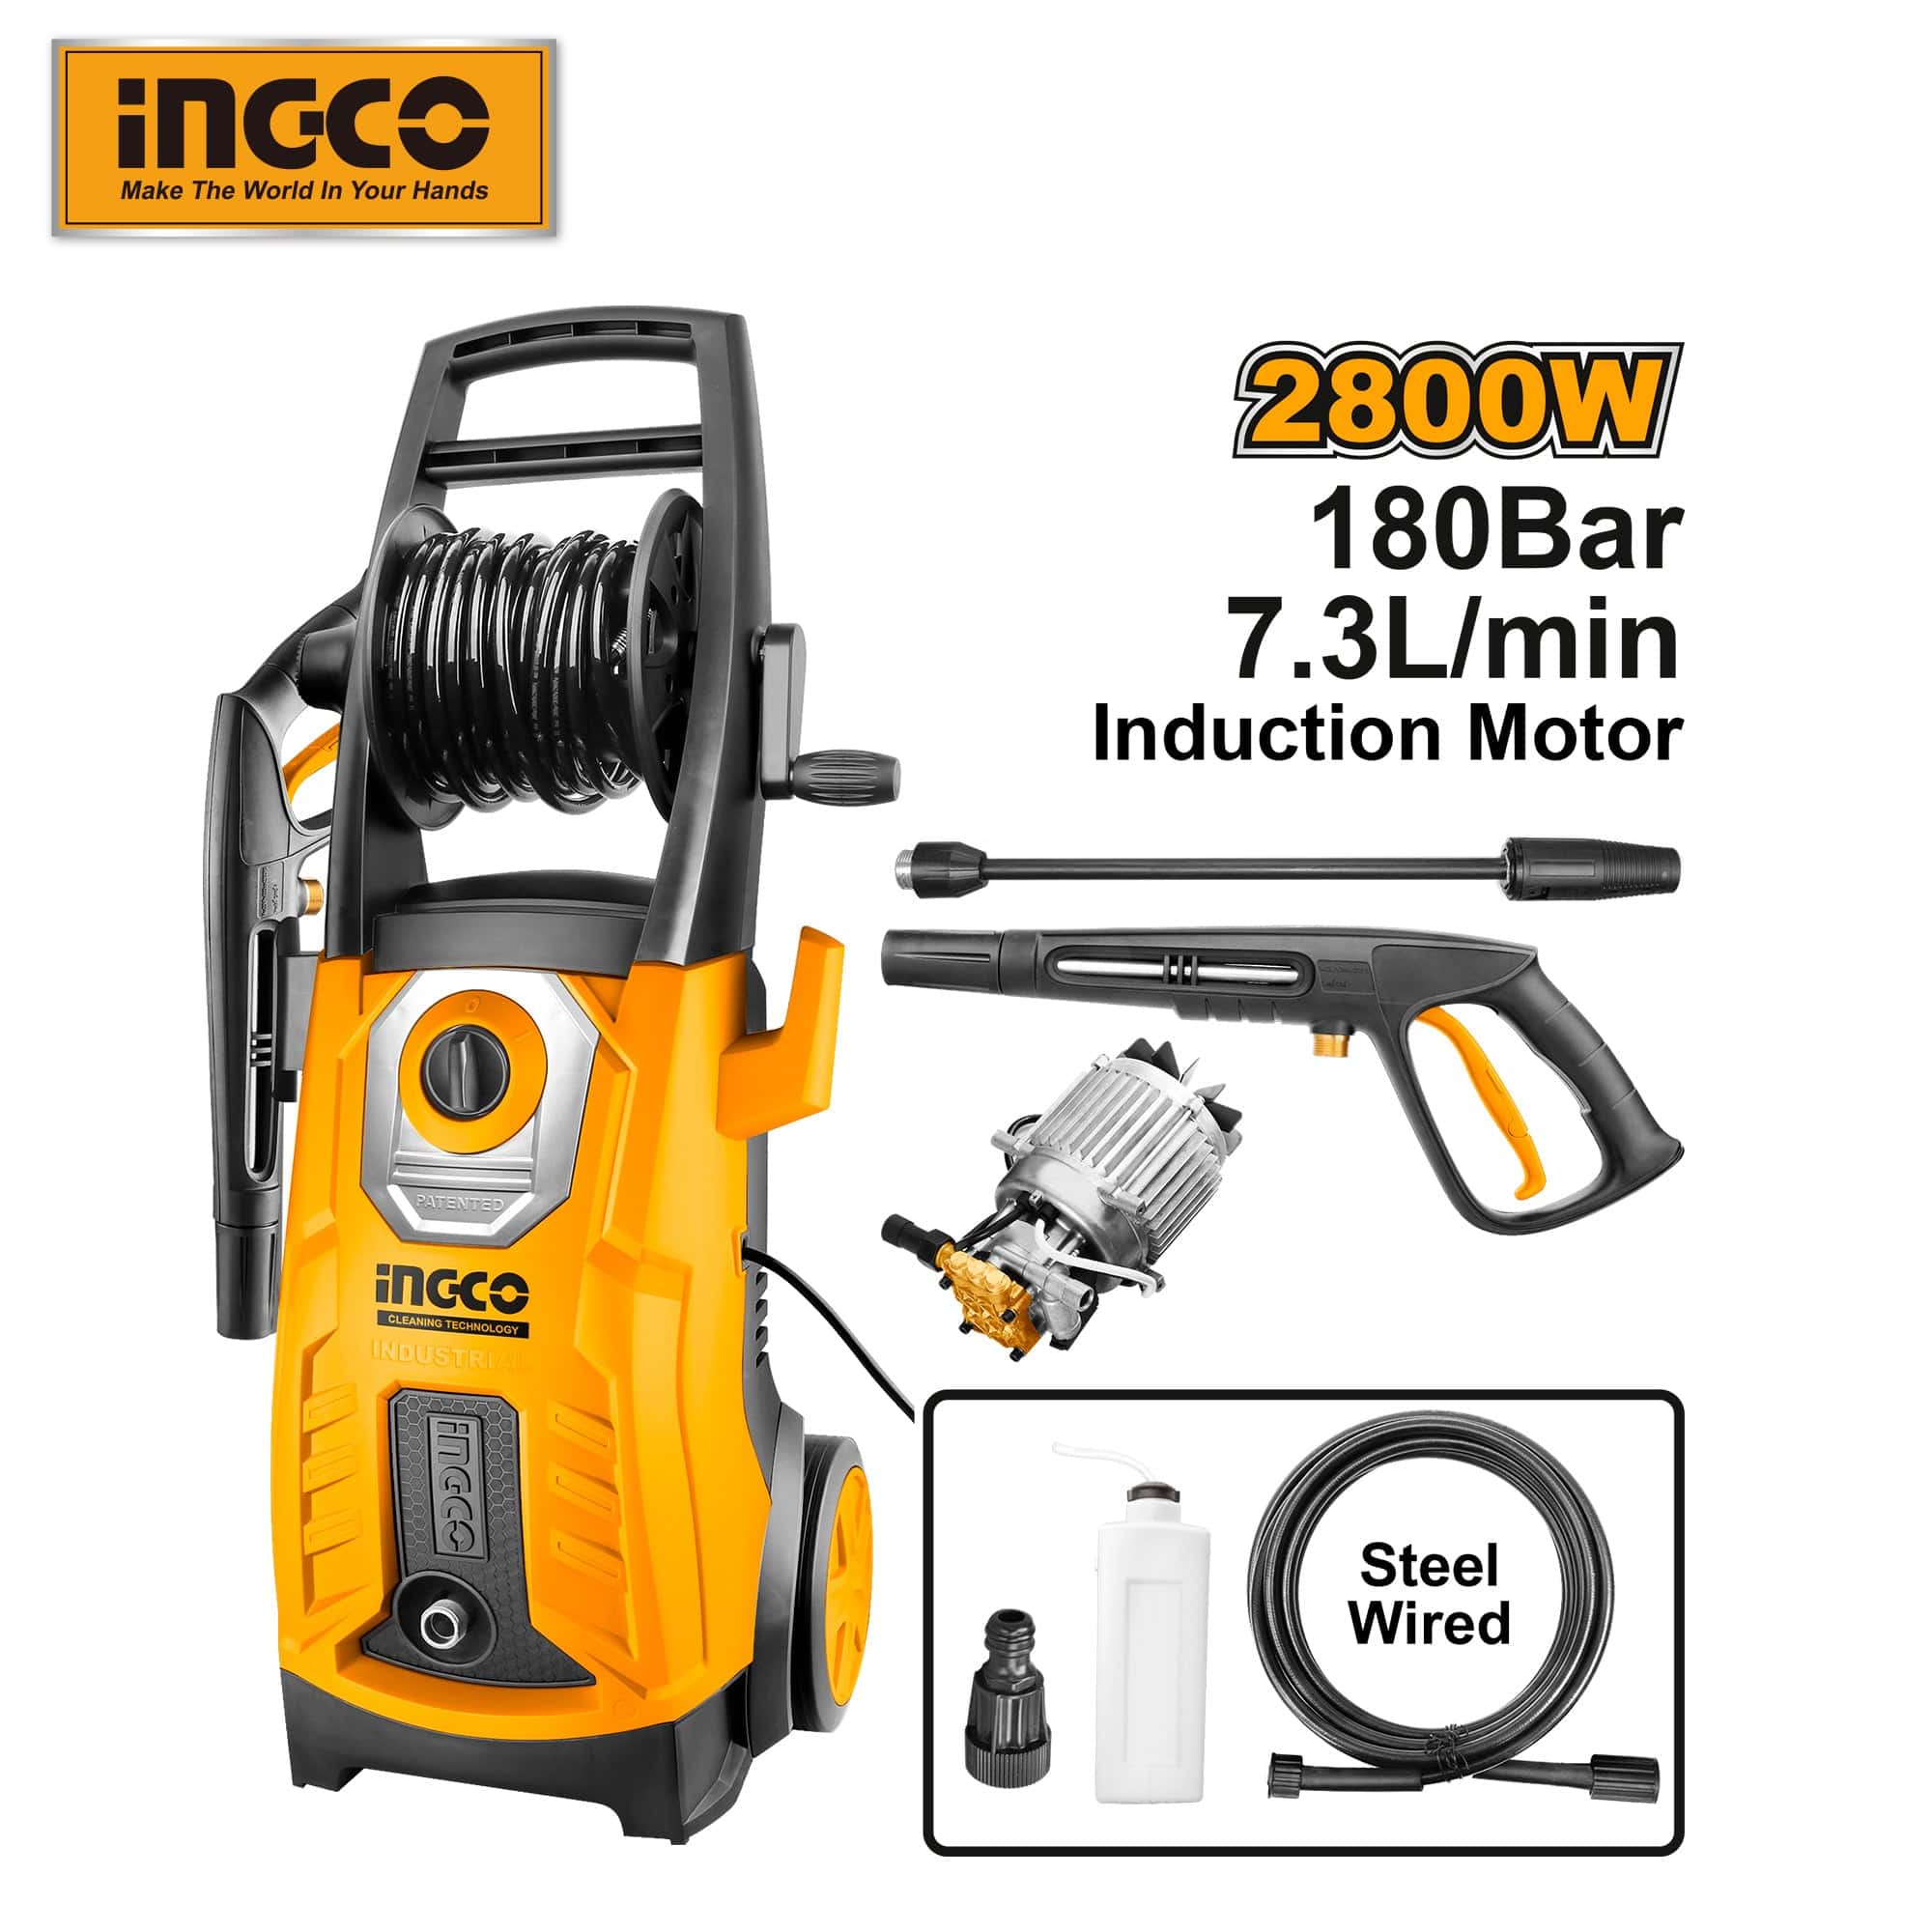 Ingco High Pressure Washer 2800W 180Bar | Buy Online in Accra, Ghana - Supply Master Pressure Washer Buy Tools hardware Building materials